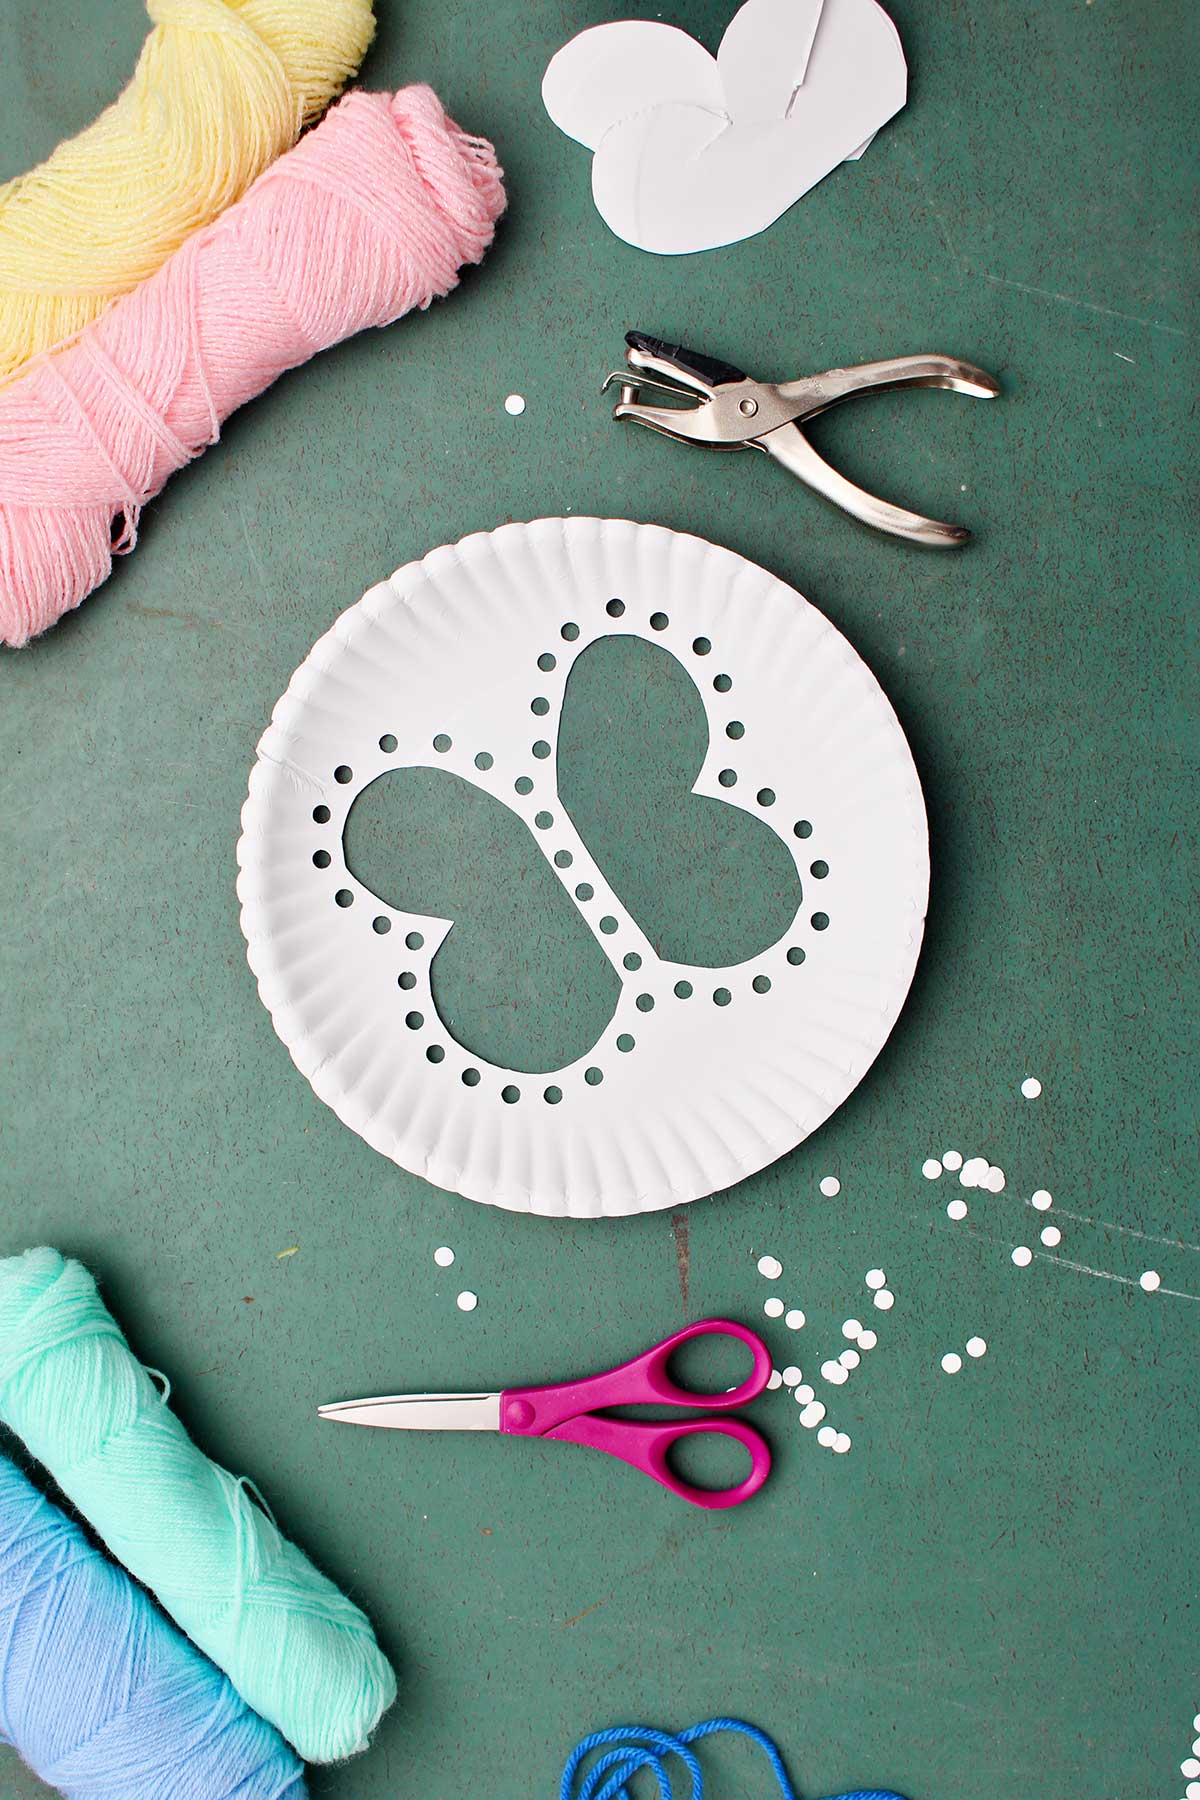 Paper plate with butterfly cut out with holes punched around the cut out with other supplies near by.